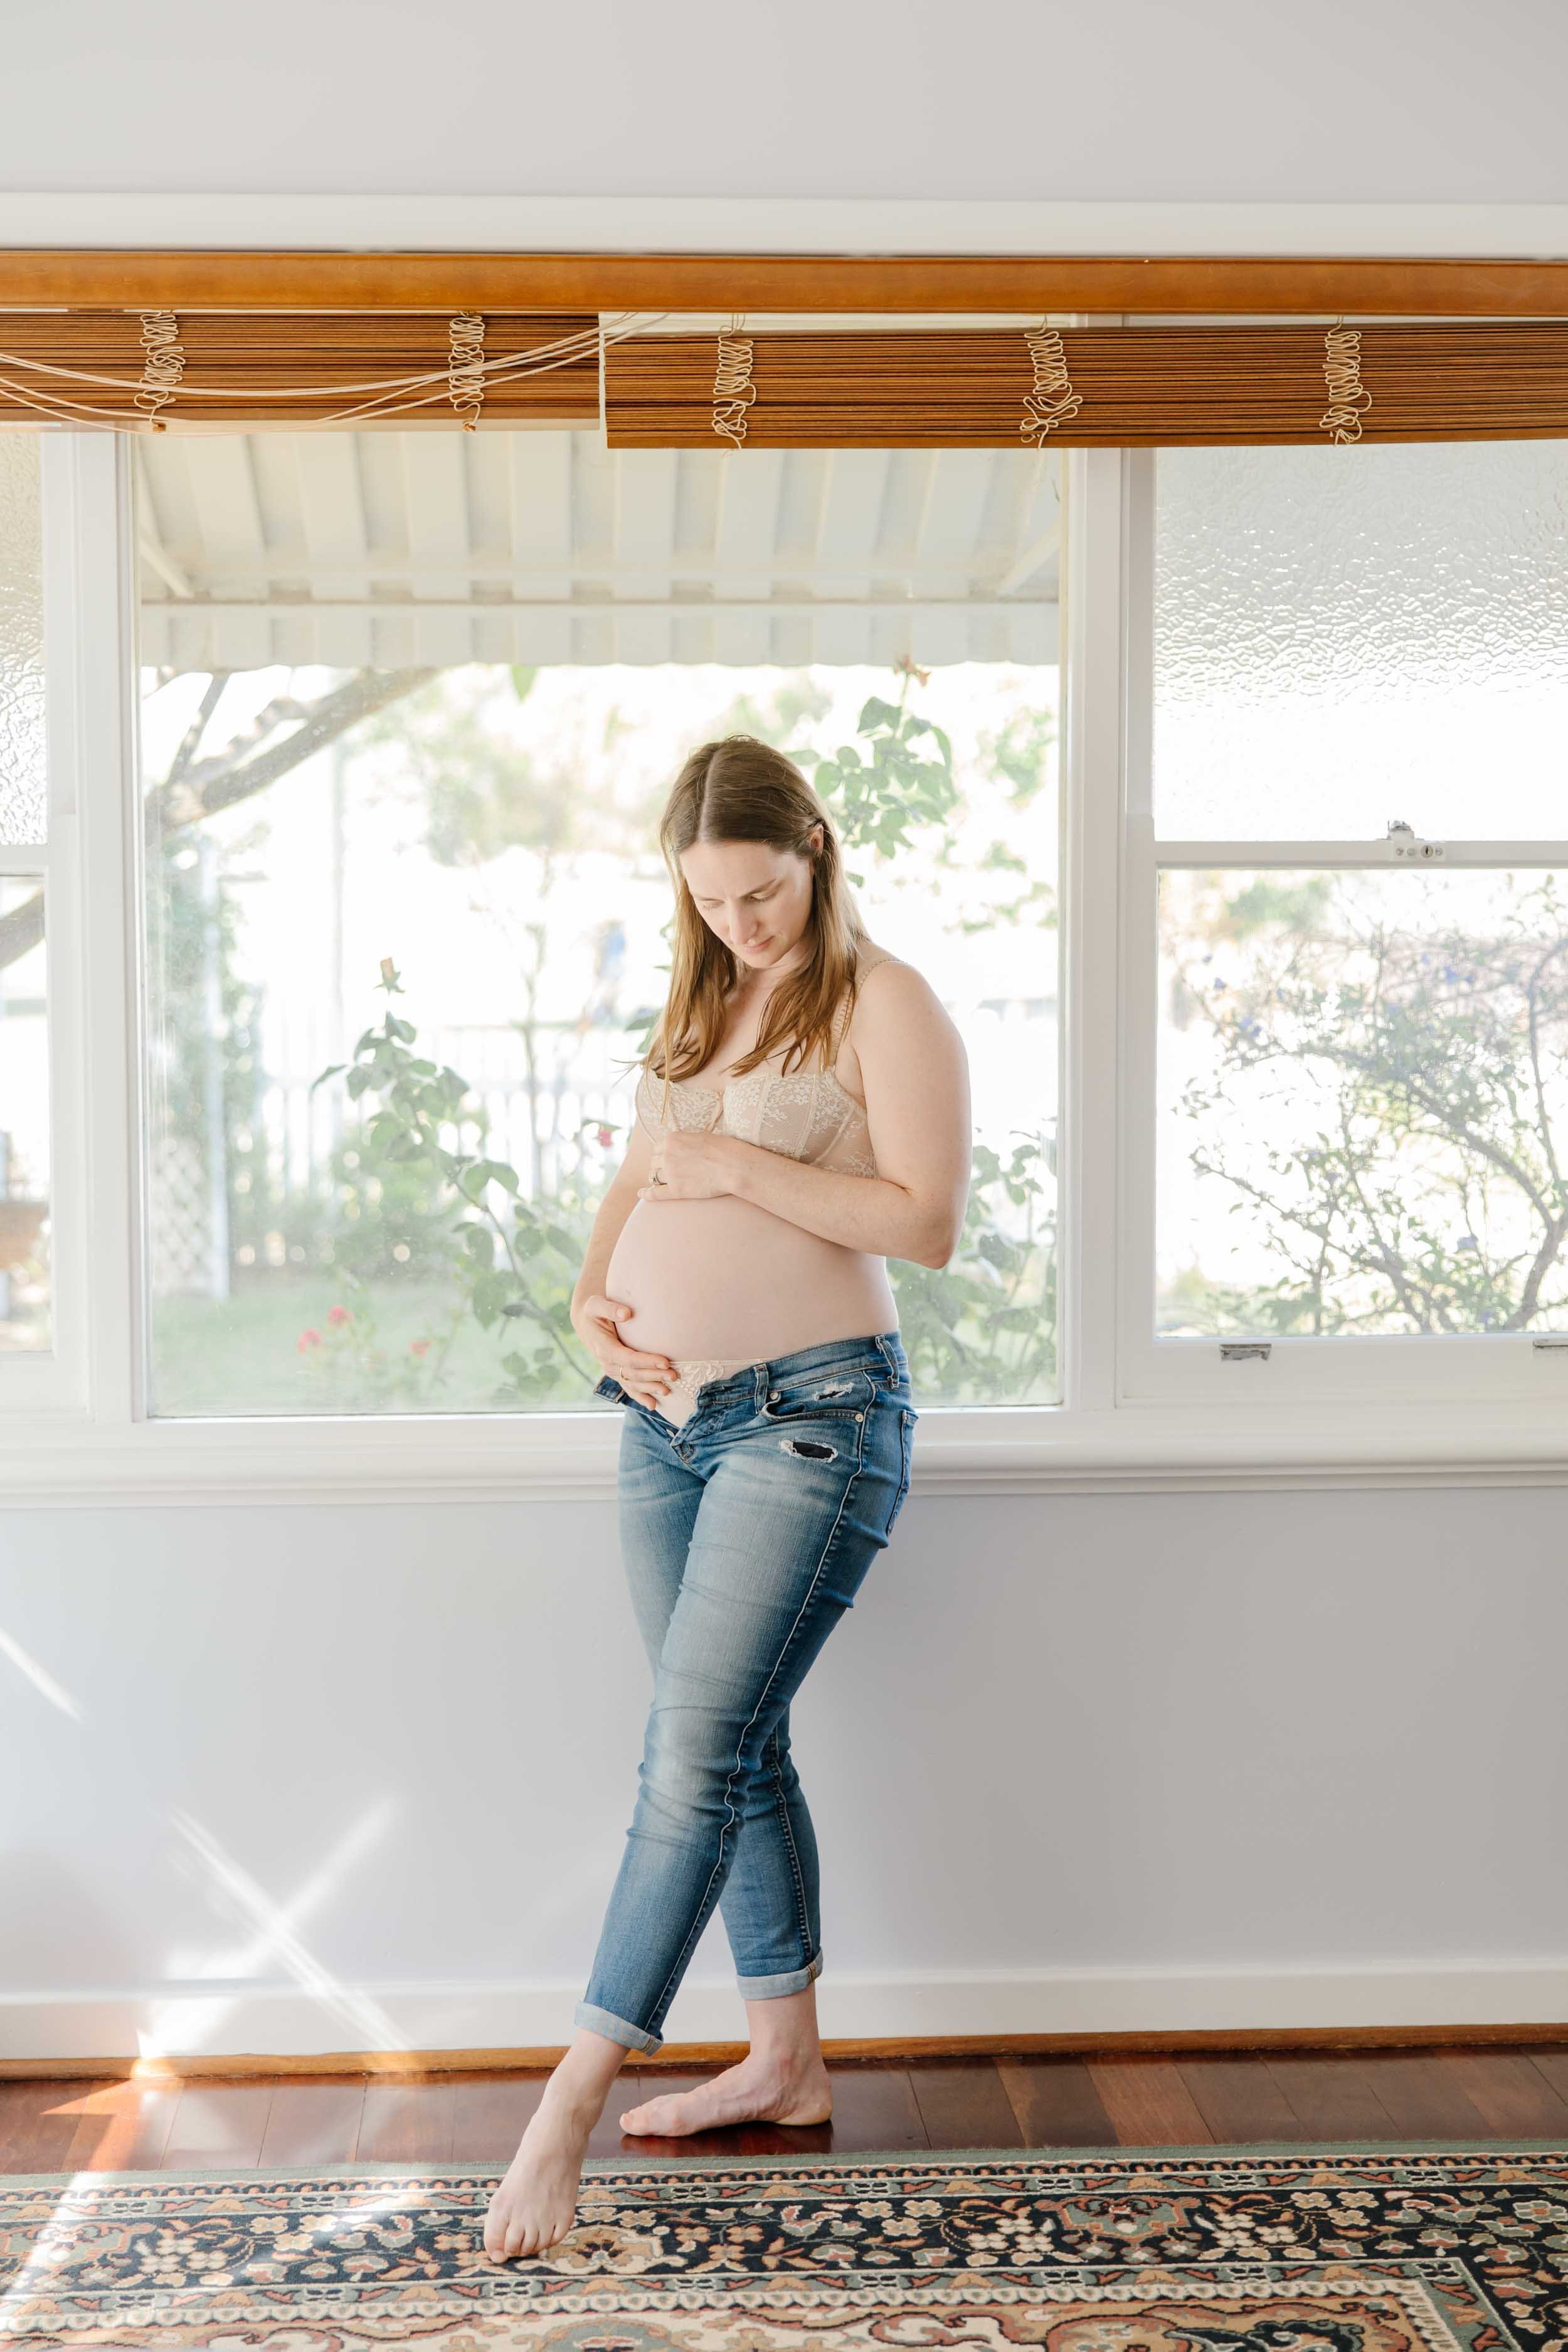 Perth_in_home_photographer_maternity_021.jpg